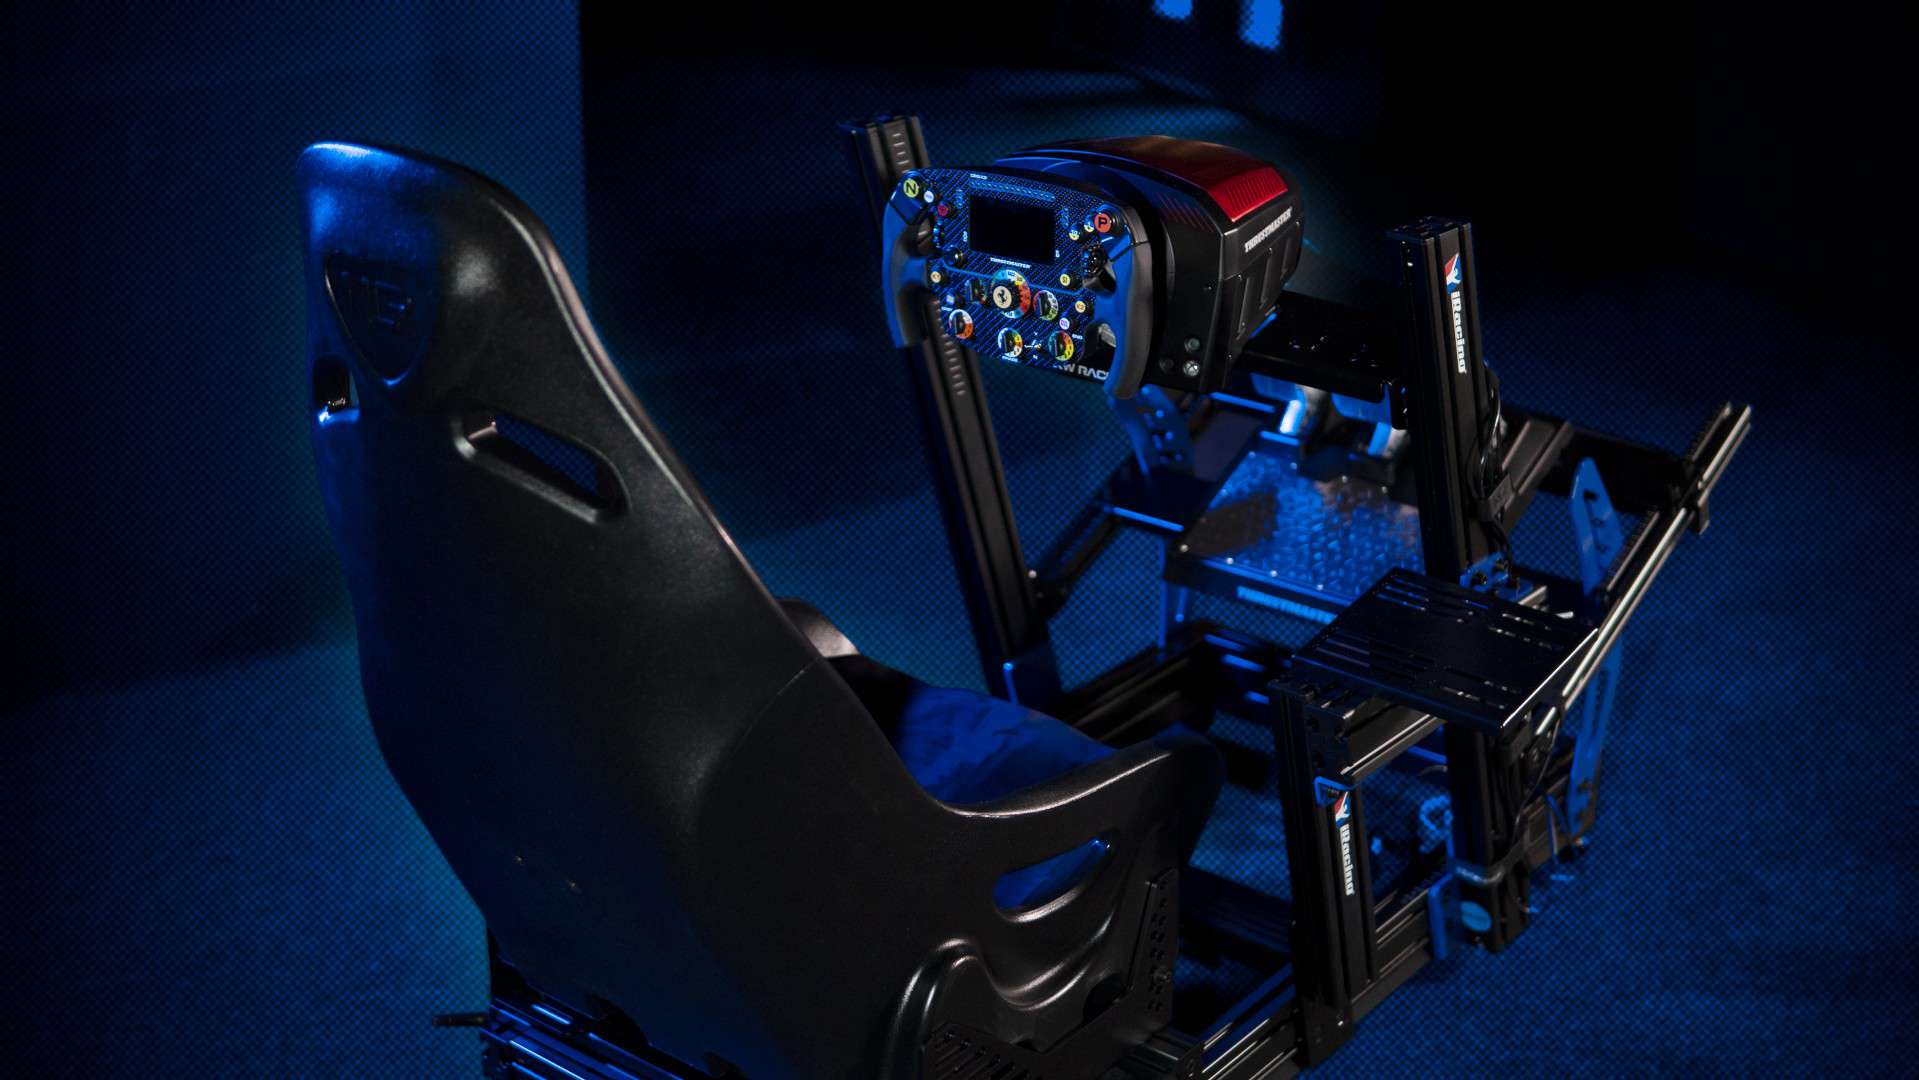 Next Level Racing F-GT Elite iRacing Edition cockpit review: The